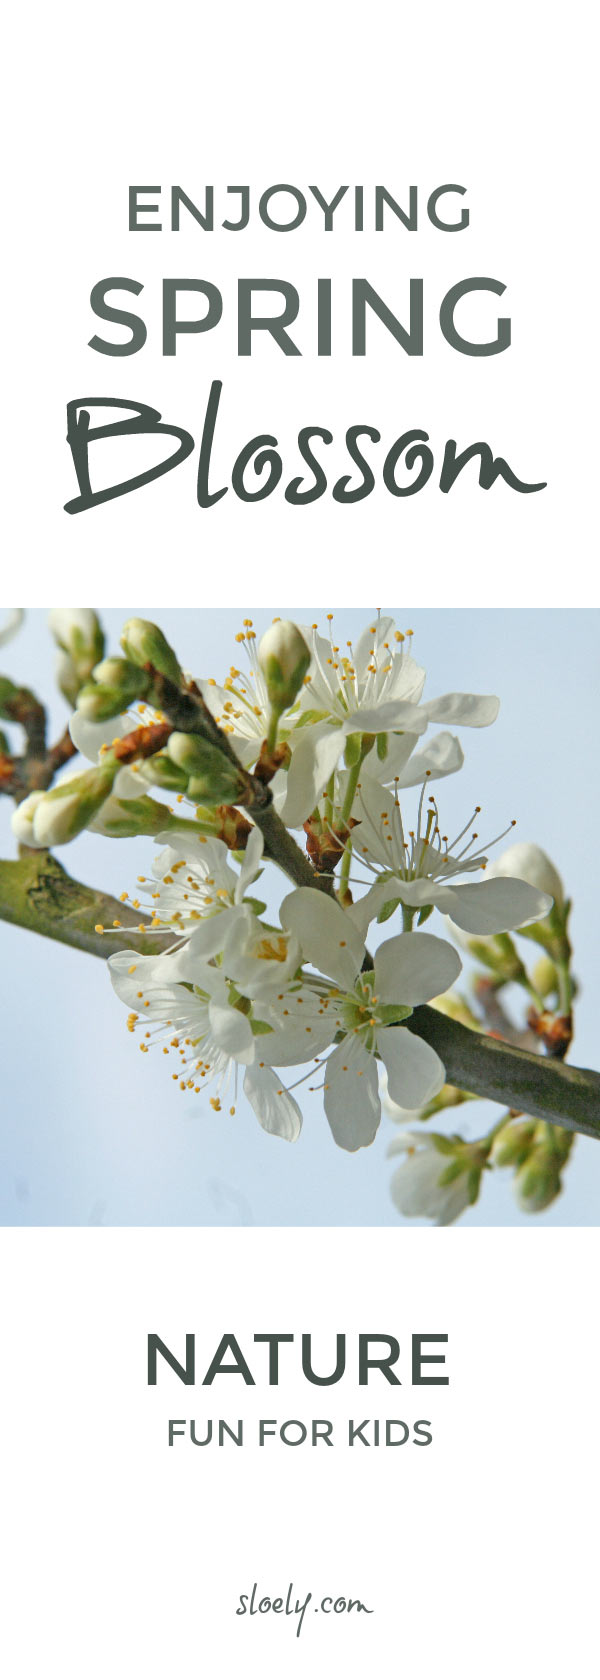 Enjoying blossom with kids - simple ways to enjoy the spring blossom and discover how it helps pollination and the growth of new seeds and fruit on a tree #blossom #trees #nature #naturelover #pollination #plantscience